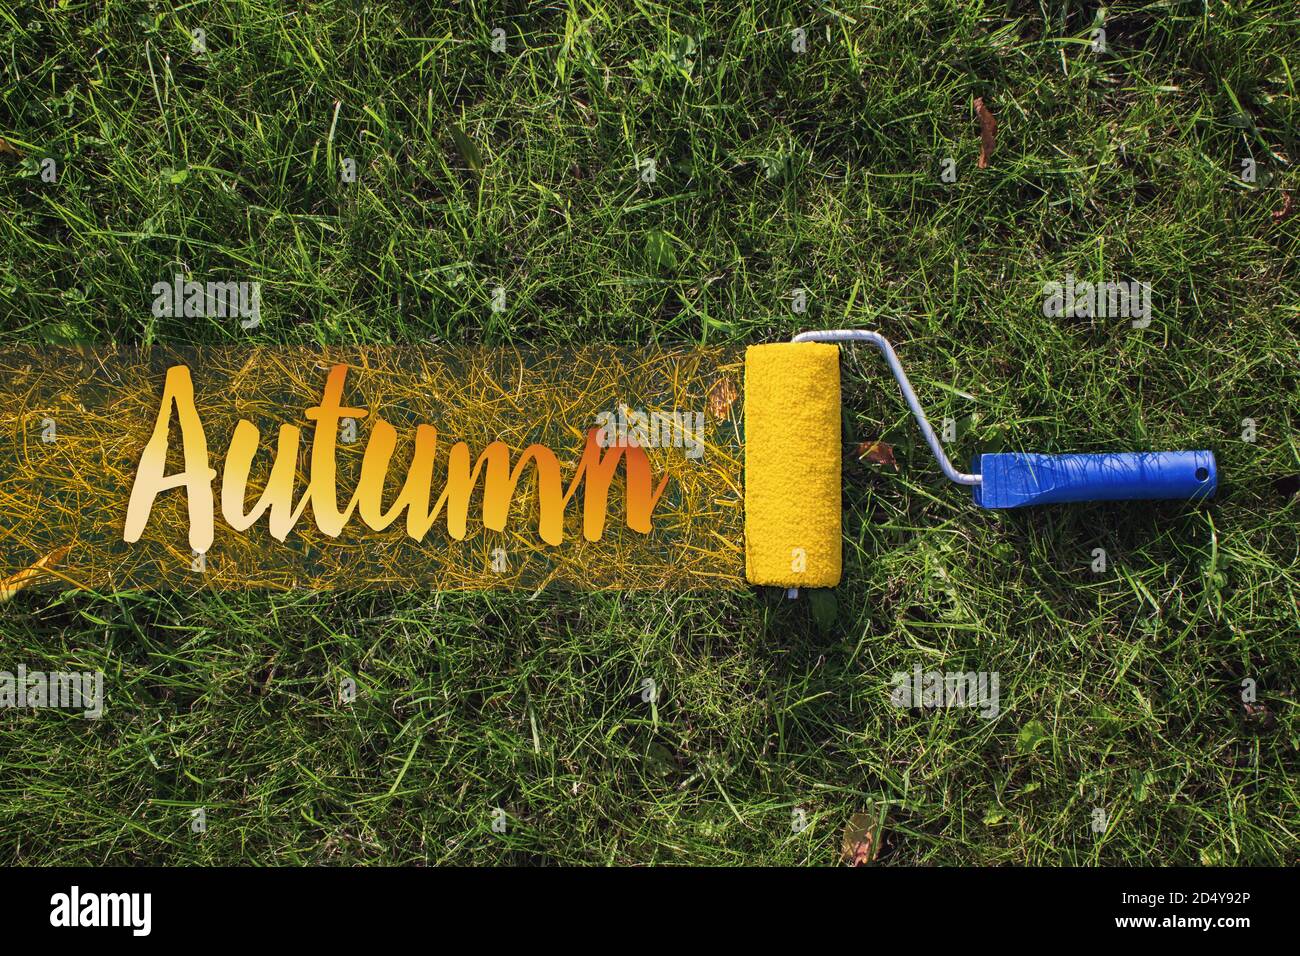 Top view of a paint roller painting a grassy strip using orange color with text Autumn Stock Photo